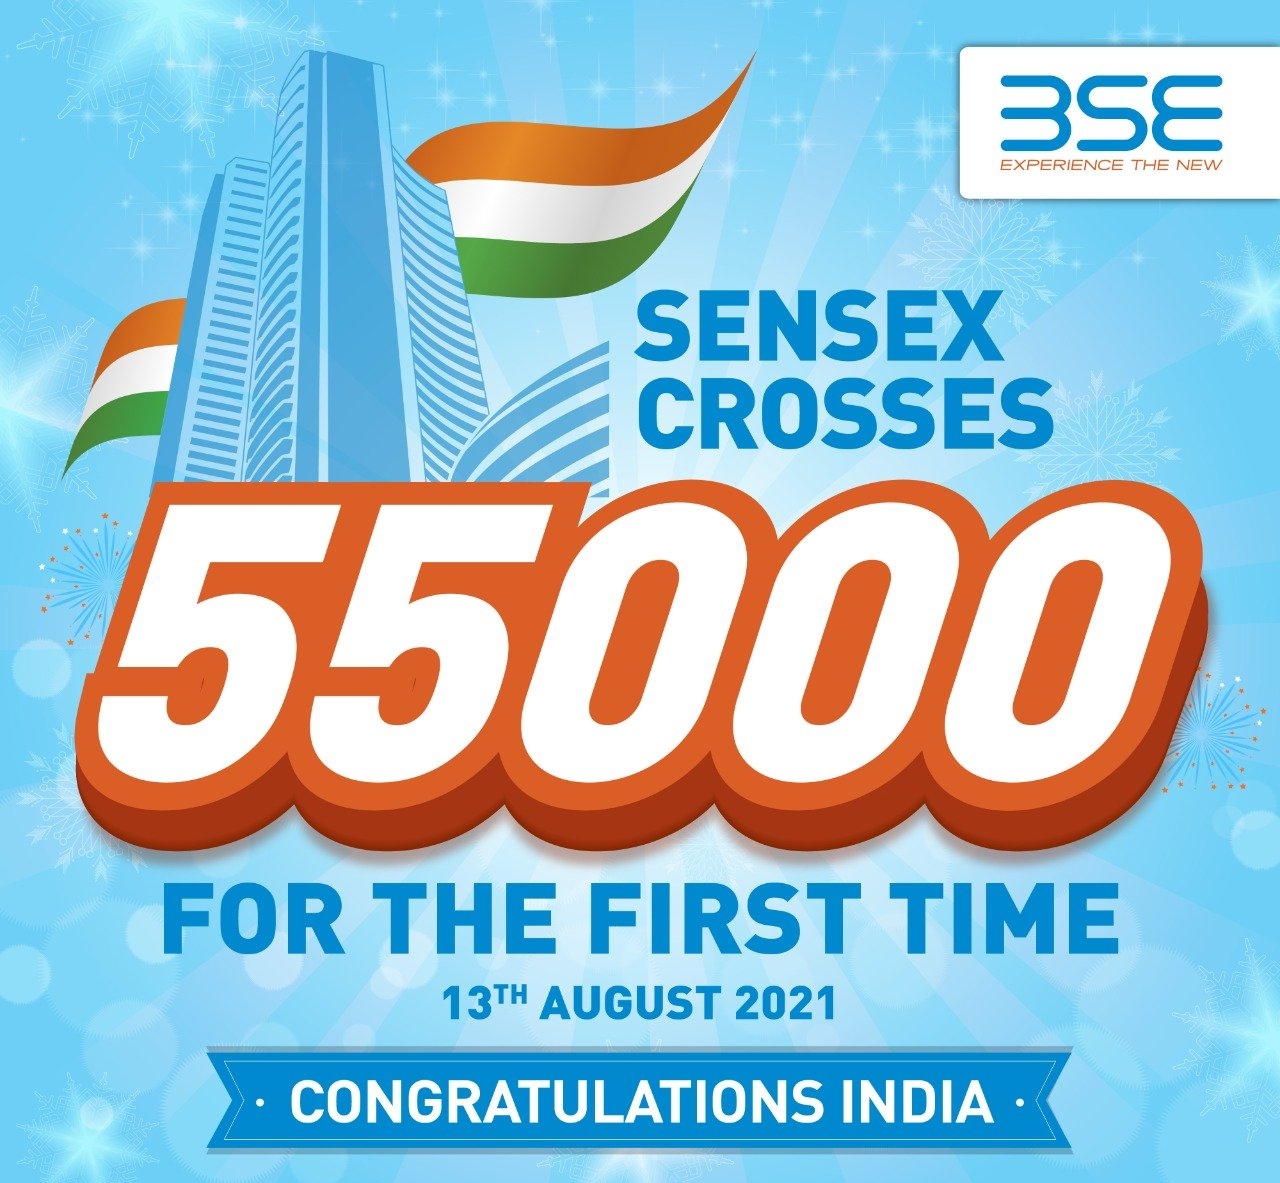 BSE wishes for crossing 55K mark